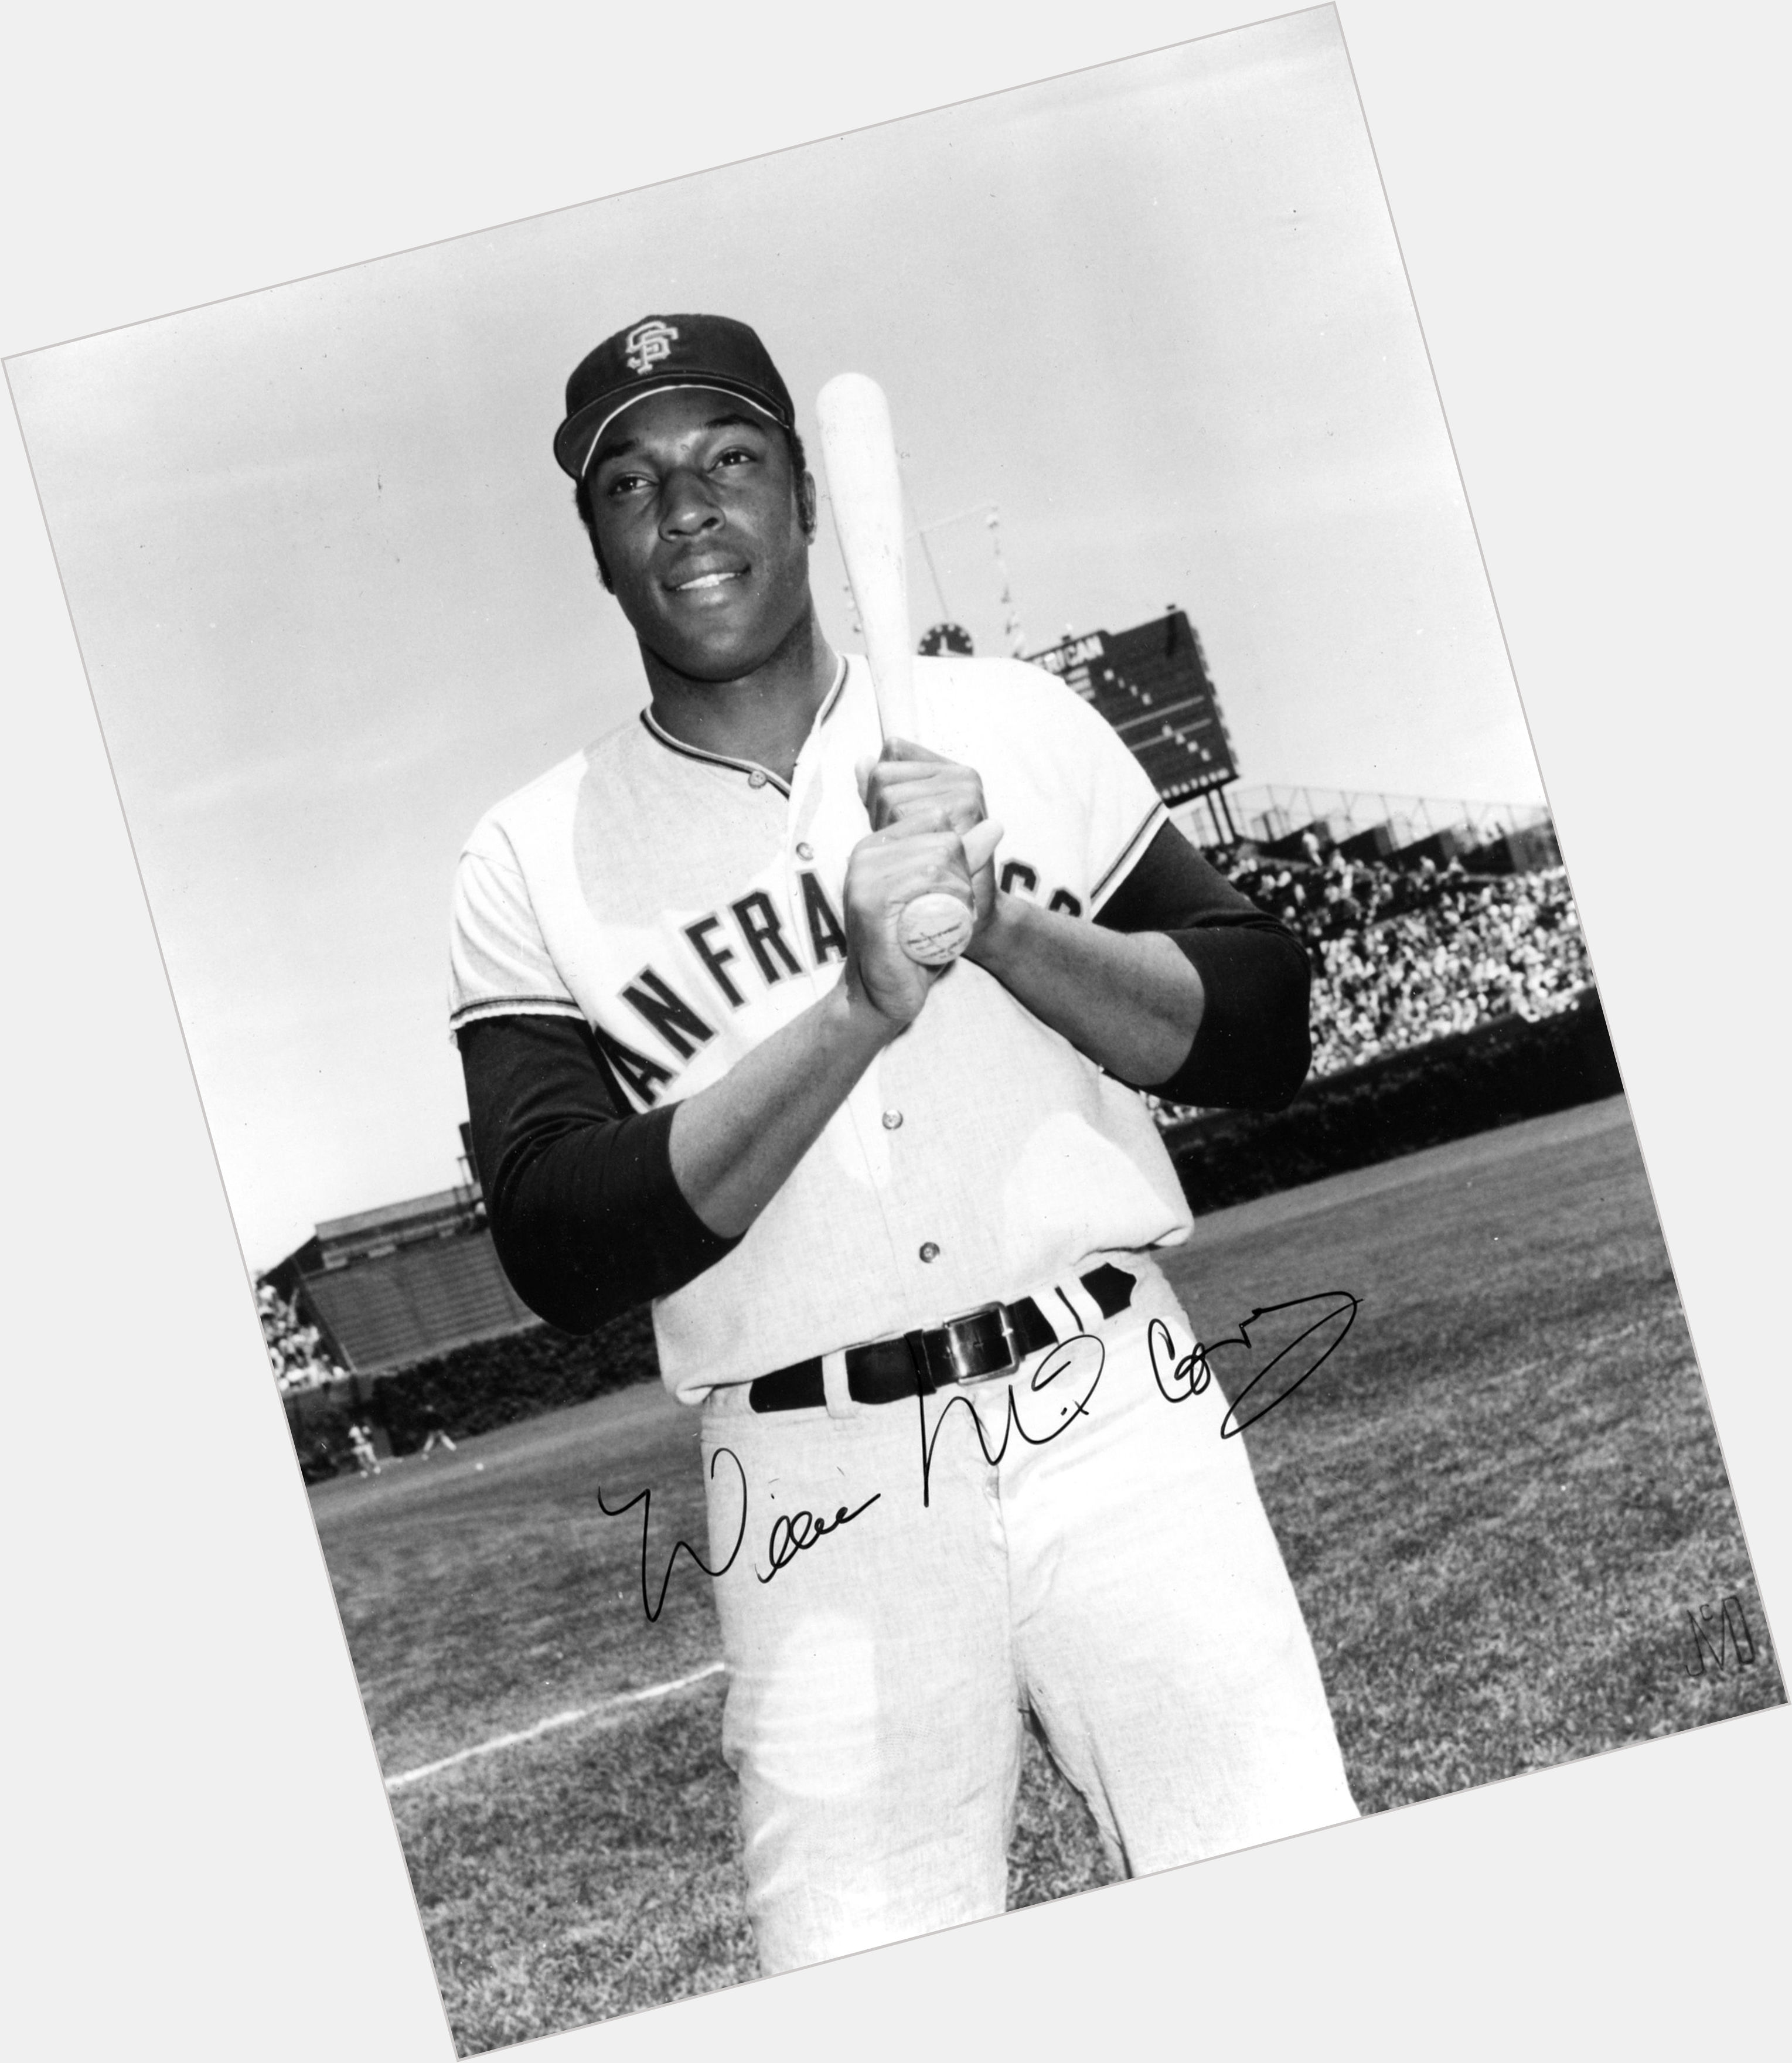 Https://fanpagepress.net/m/W/Willie Mccovey Where Who 3